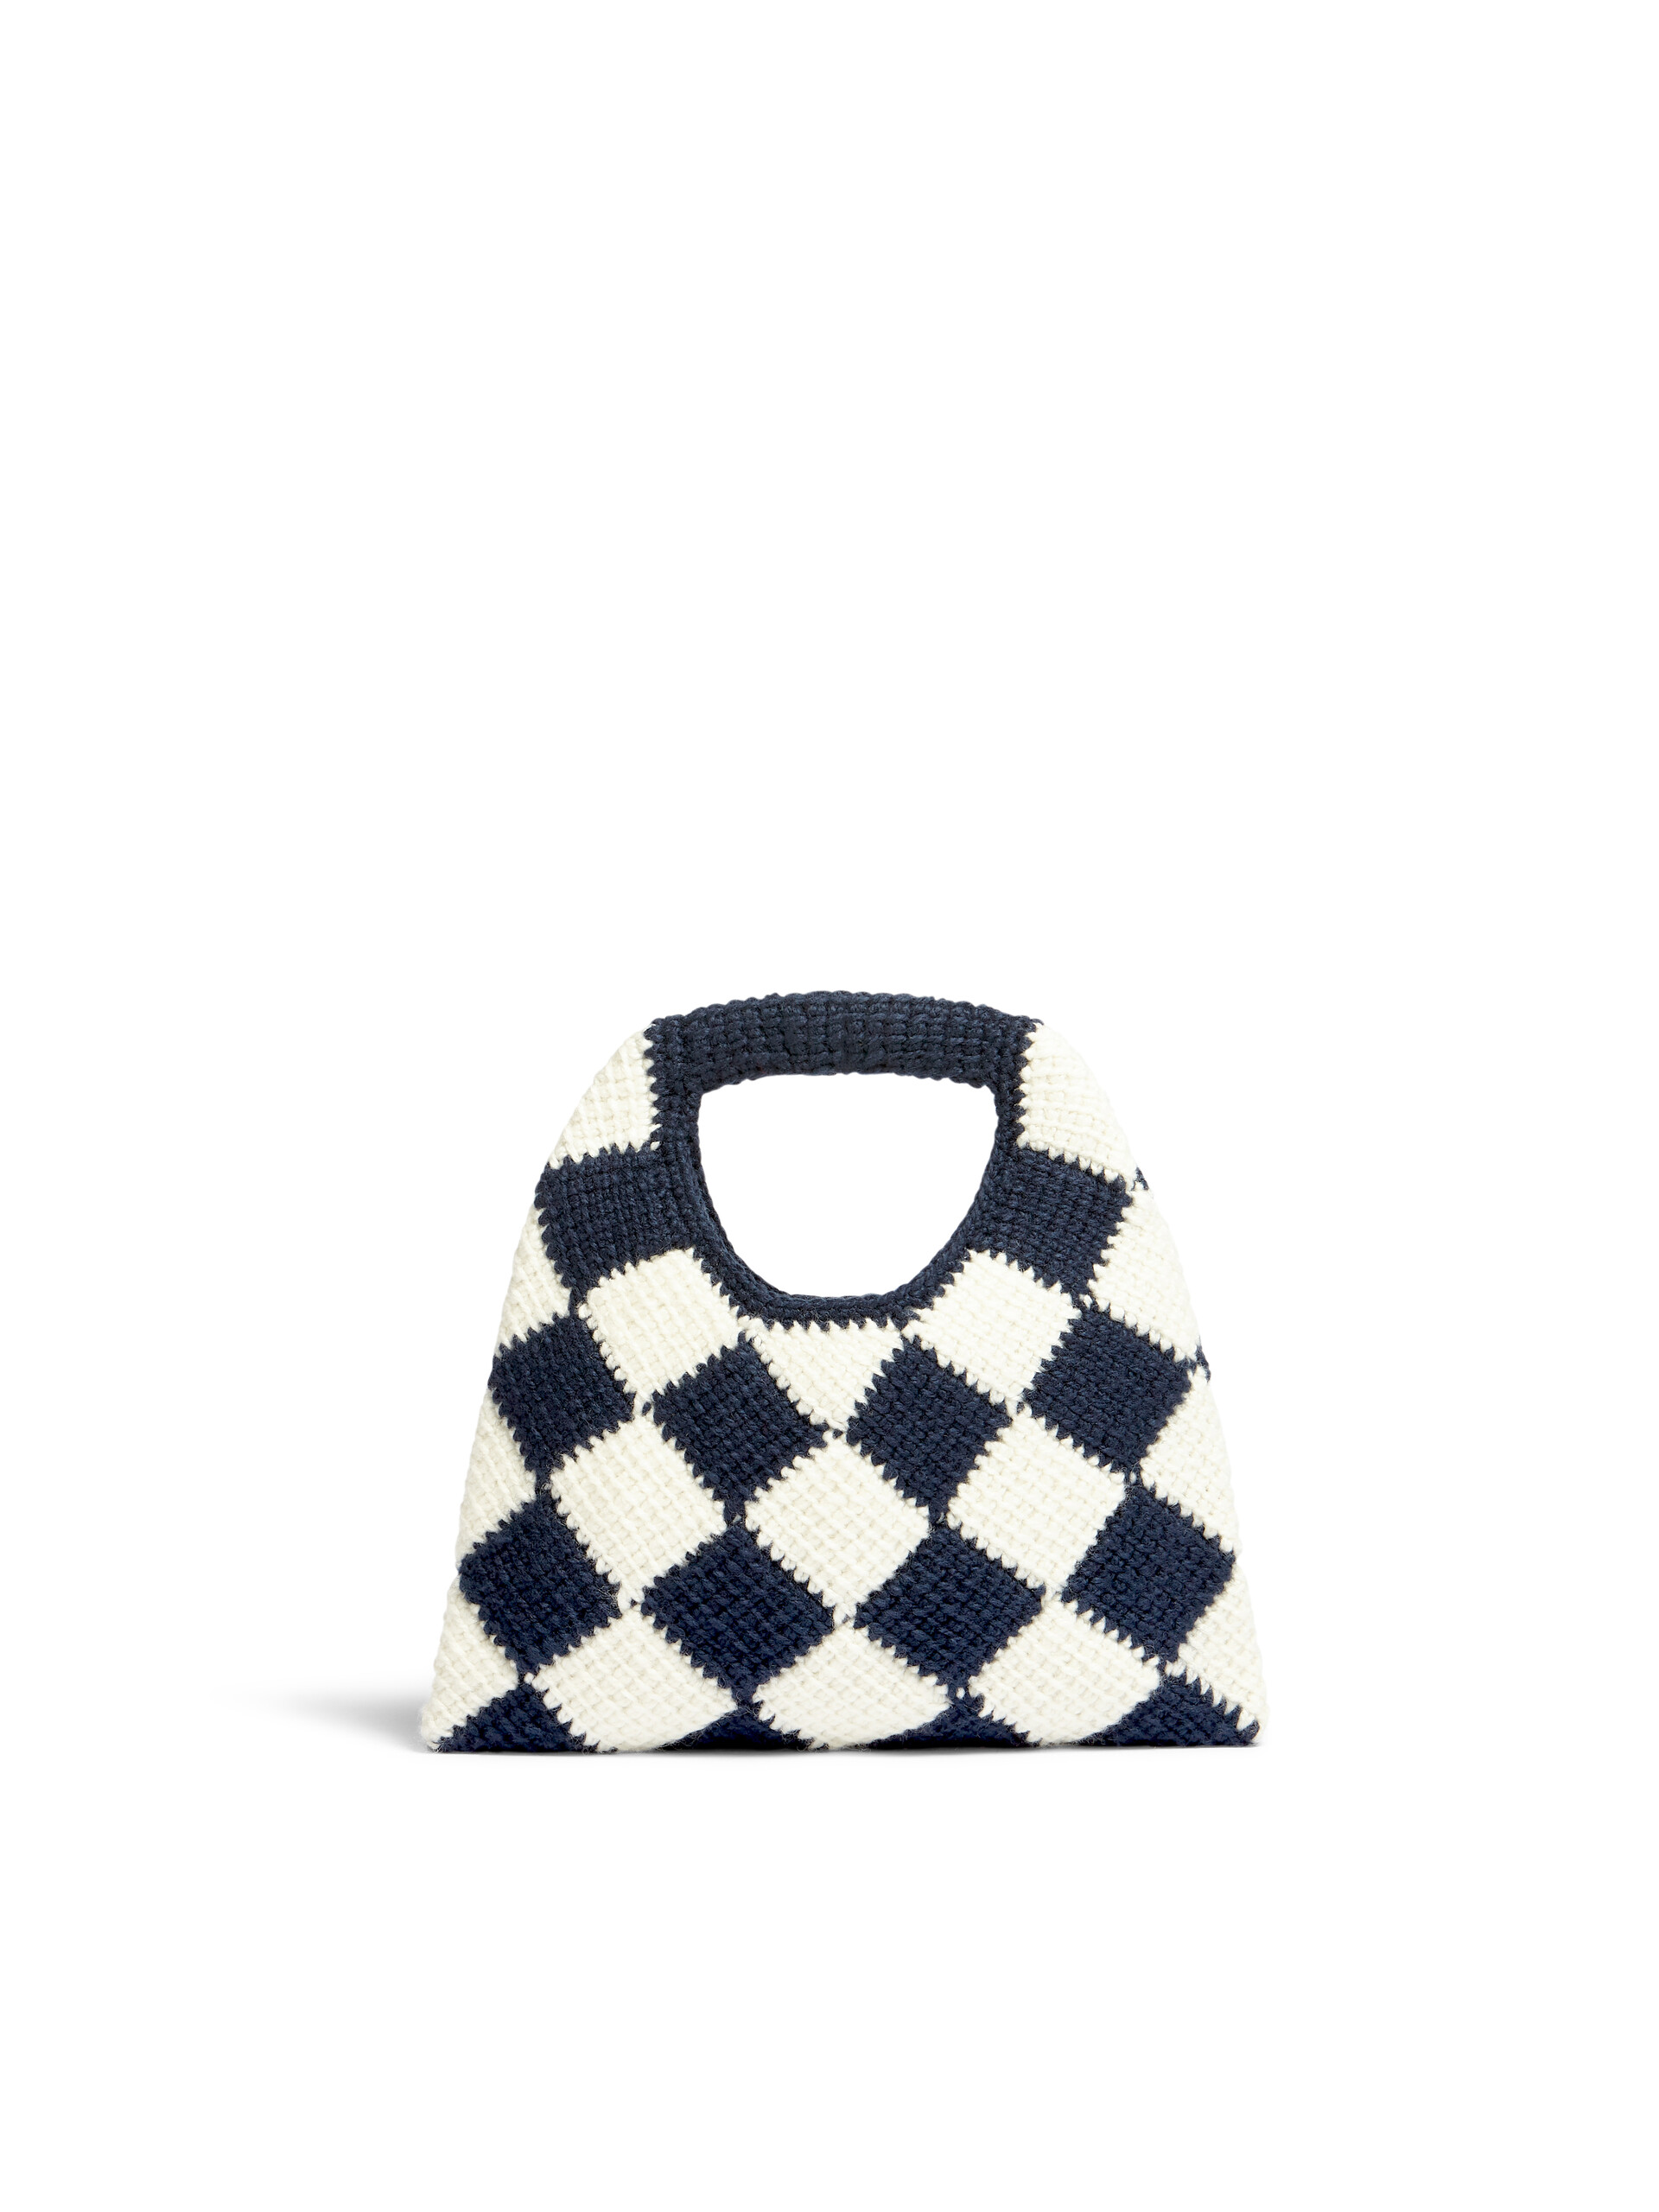 MARNI MARKET DIAMOND small bag in white and blue tech wool - Bags - Image 3